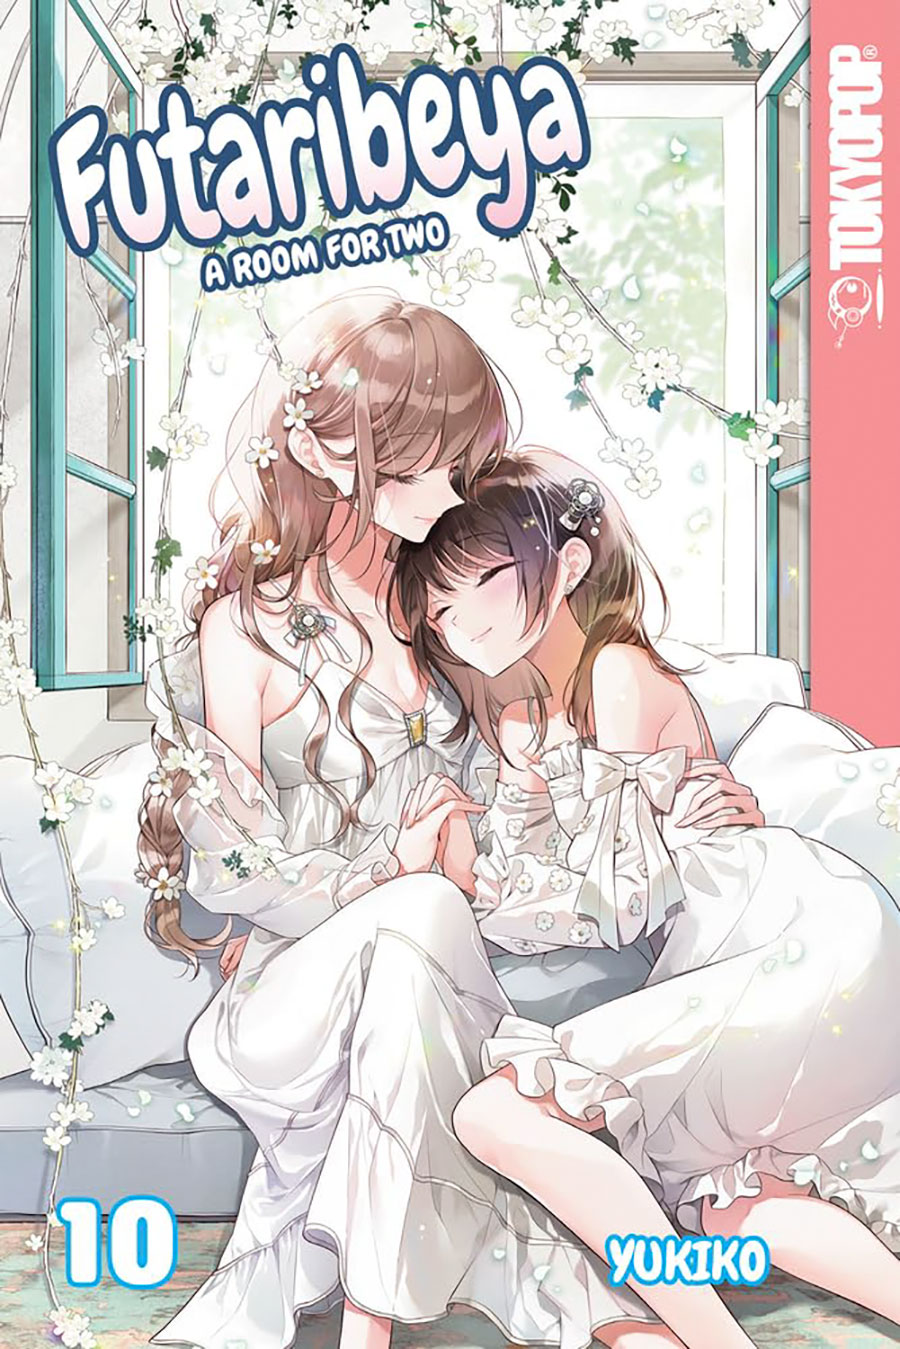 Futaribeya A Room For Two Vol 10 GN